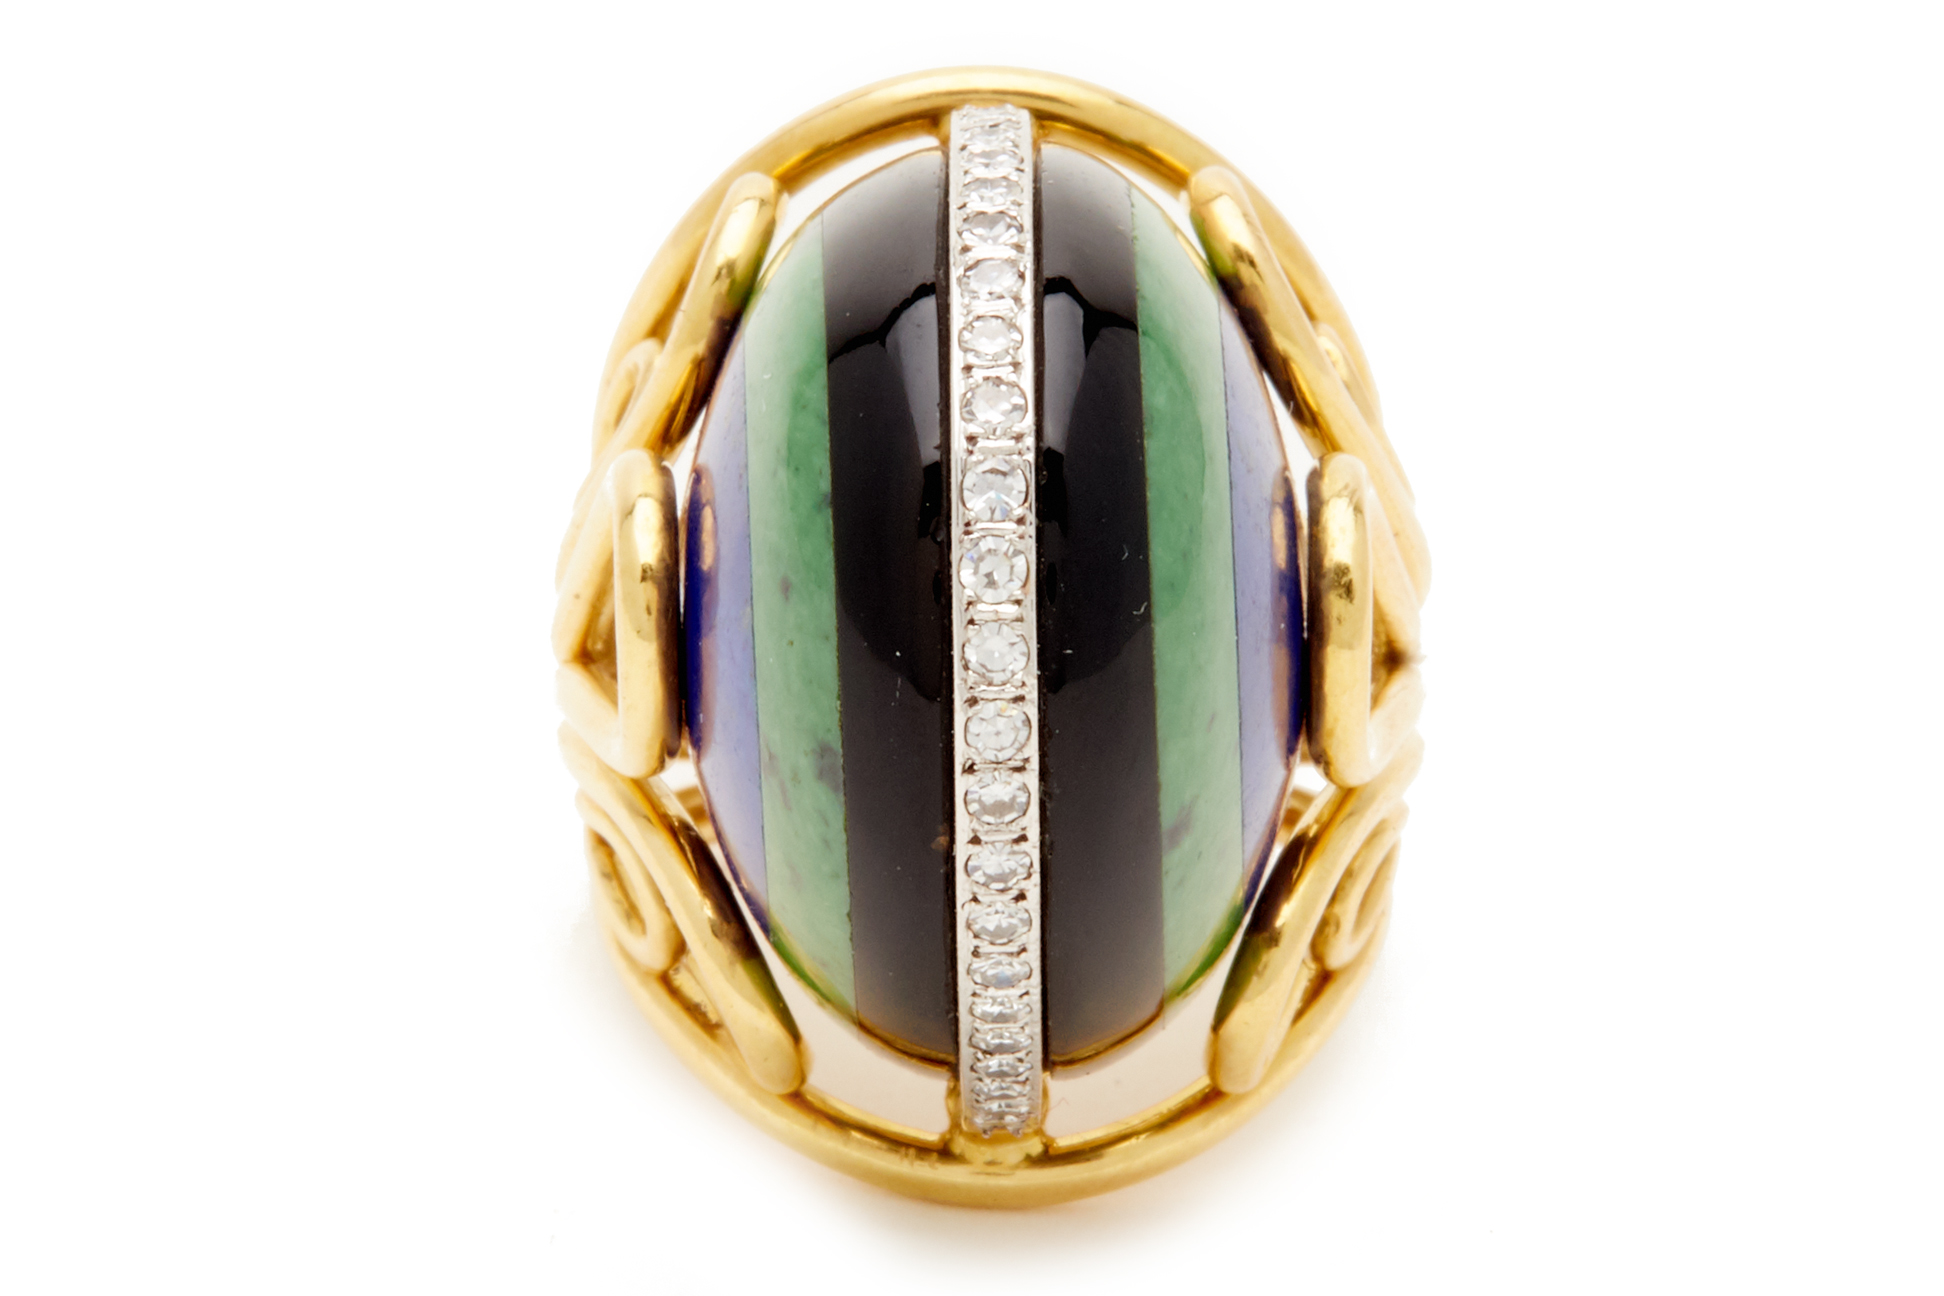 AN ART DECO STYLE DOMED RING